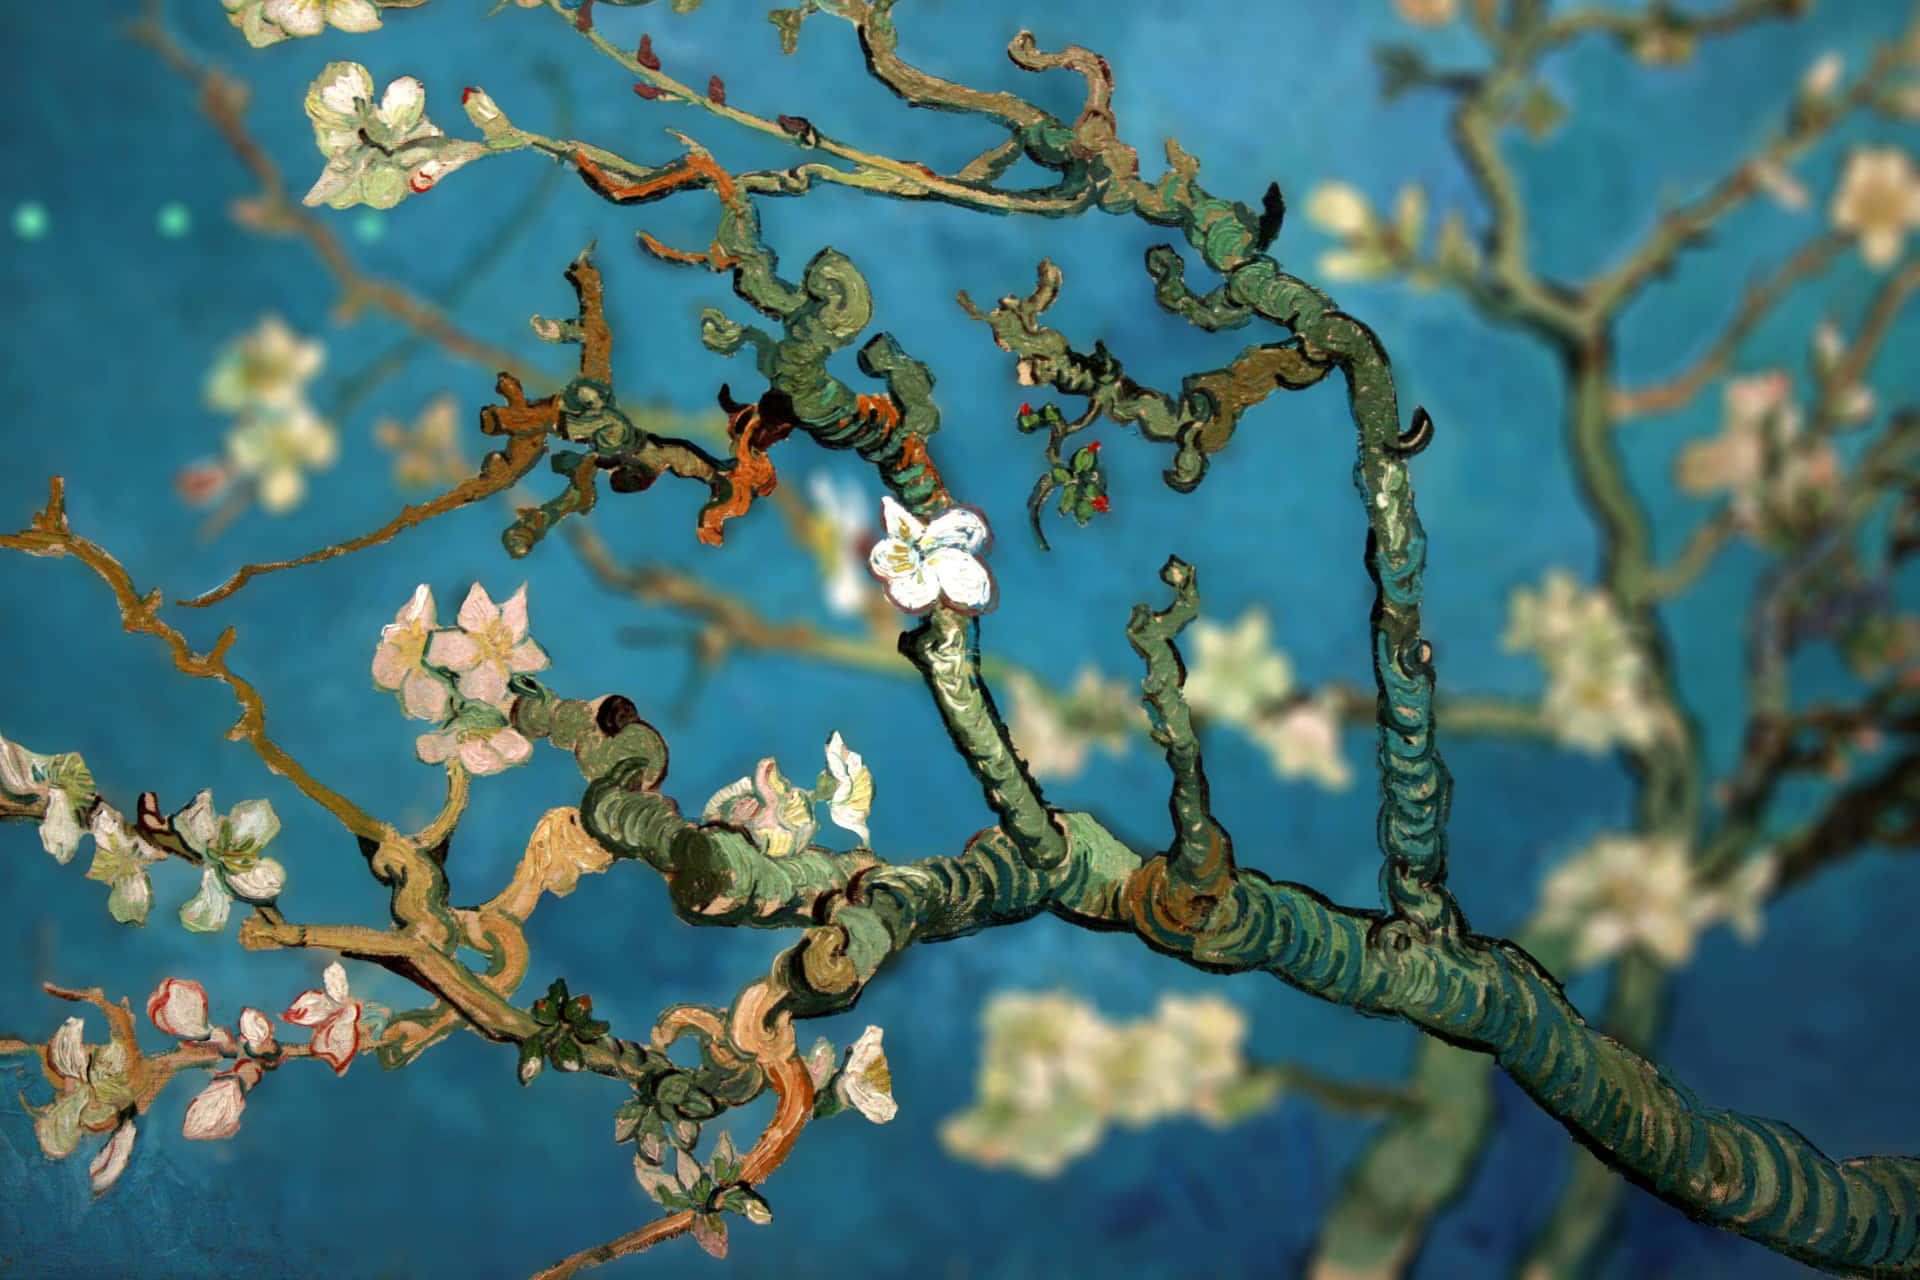 “Almond Blossom” by Vincent Van Gogh Wallpaper